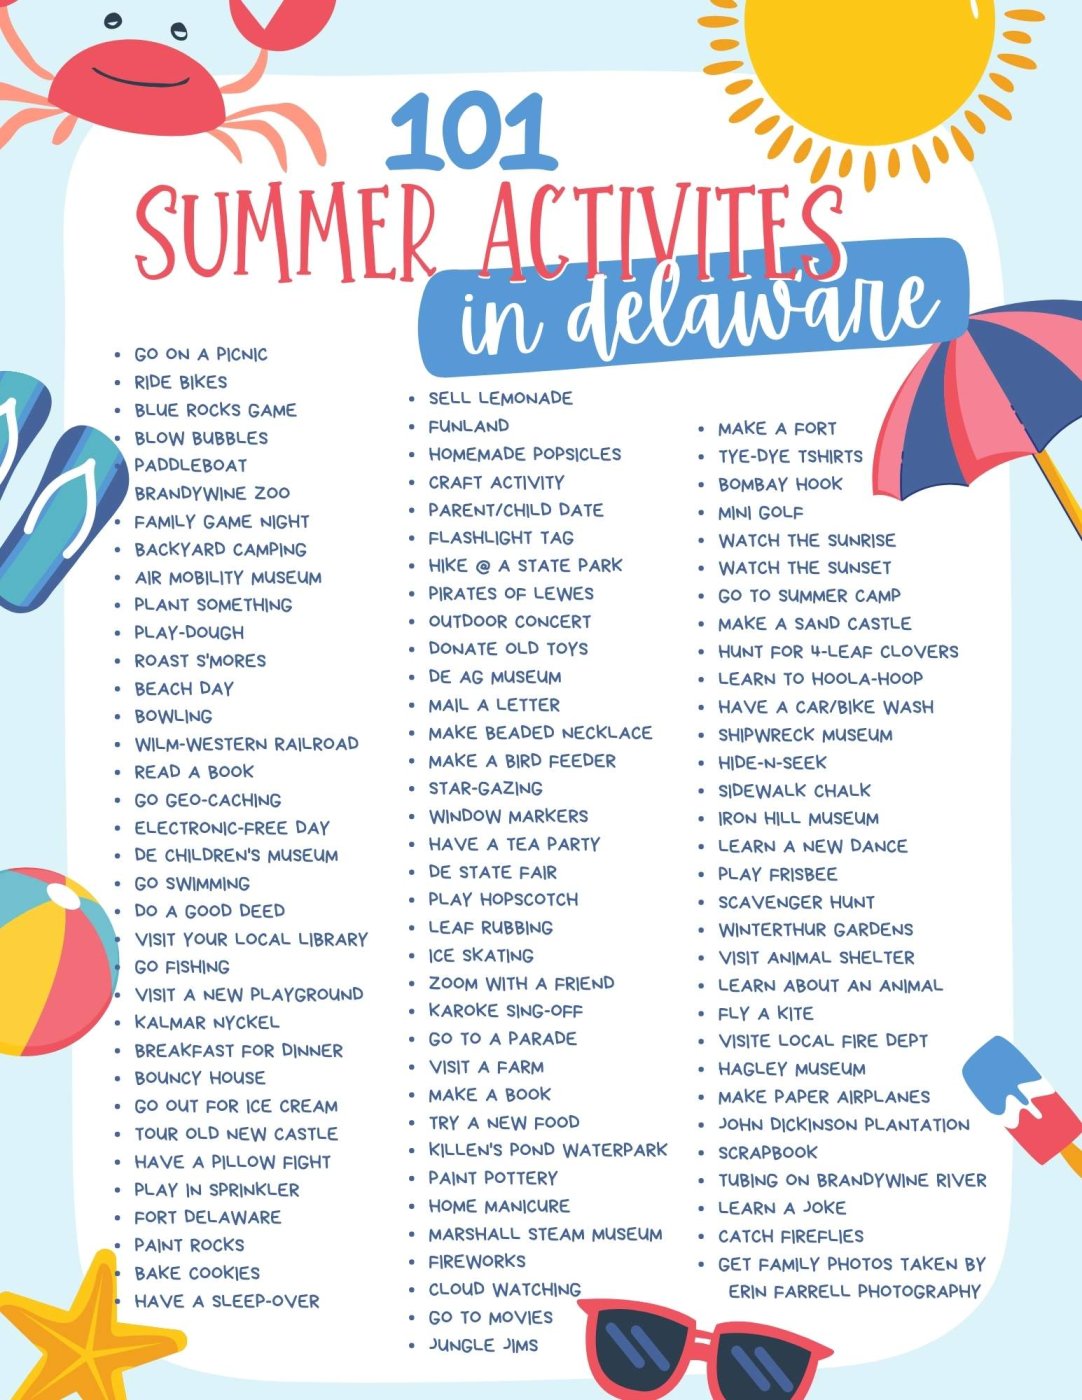 101 Summer Activities to do with your Kids in Delaware